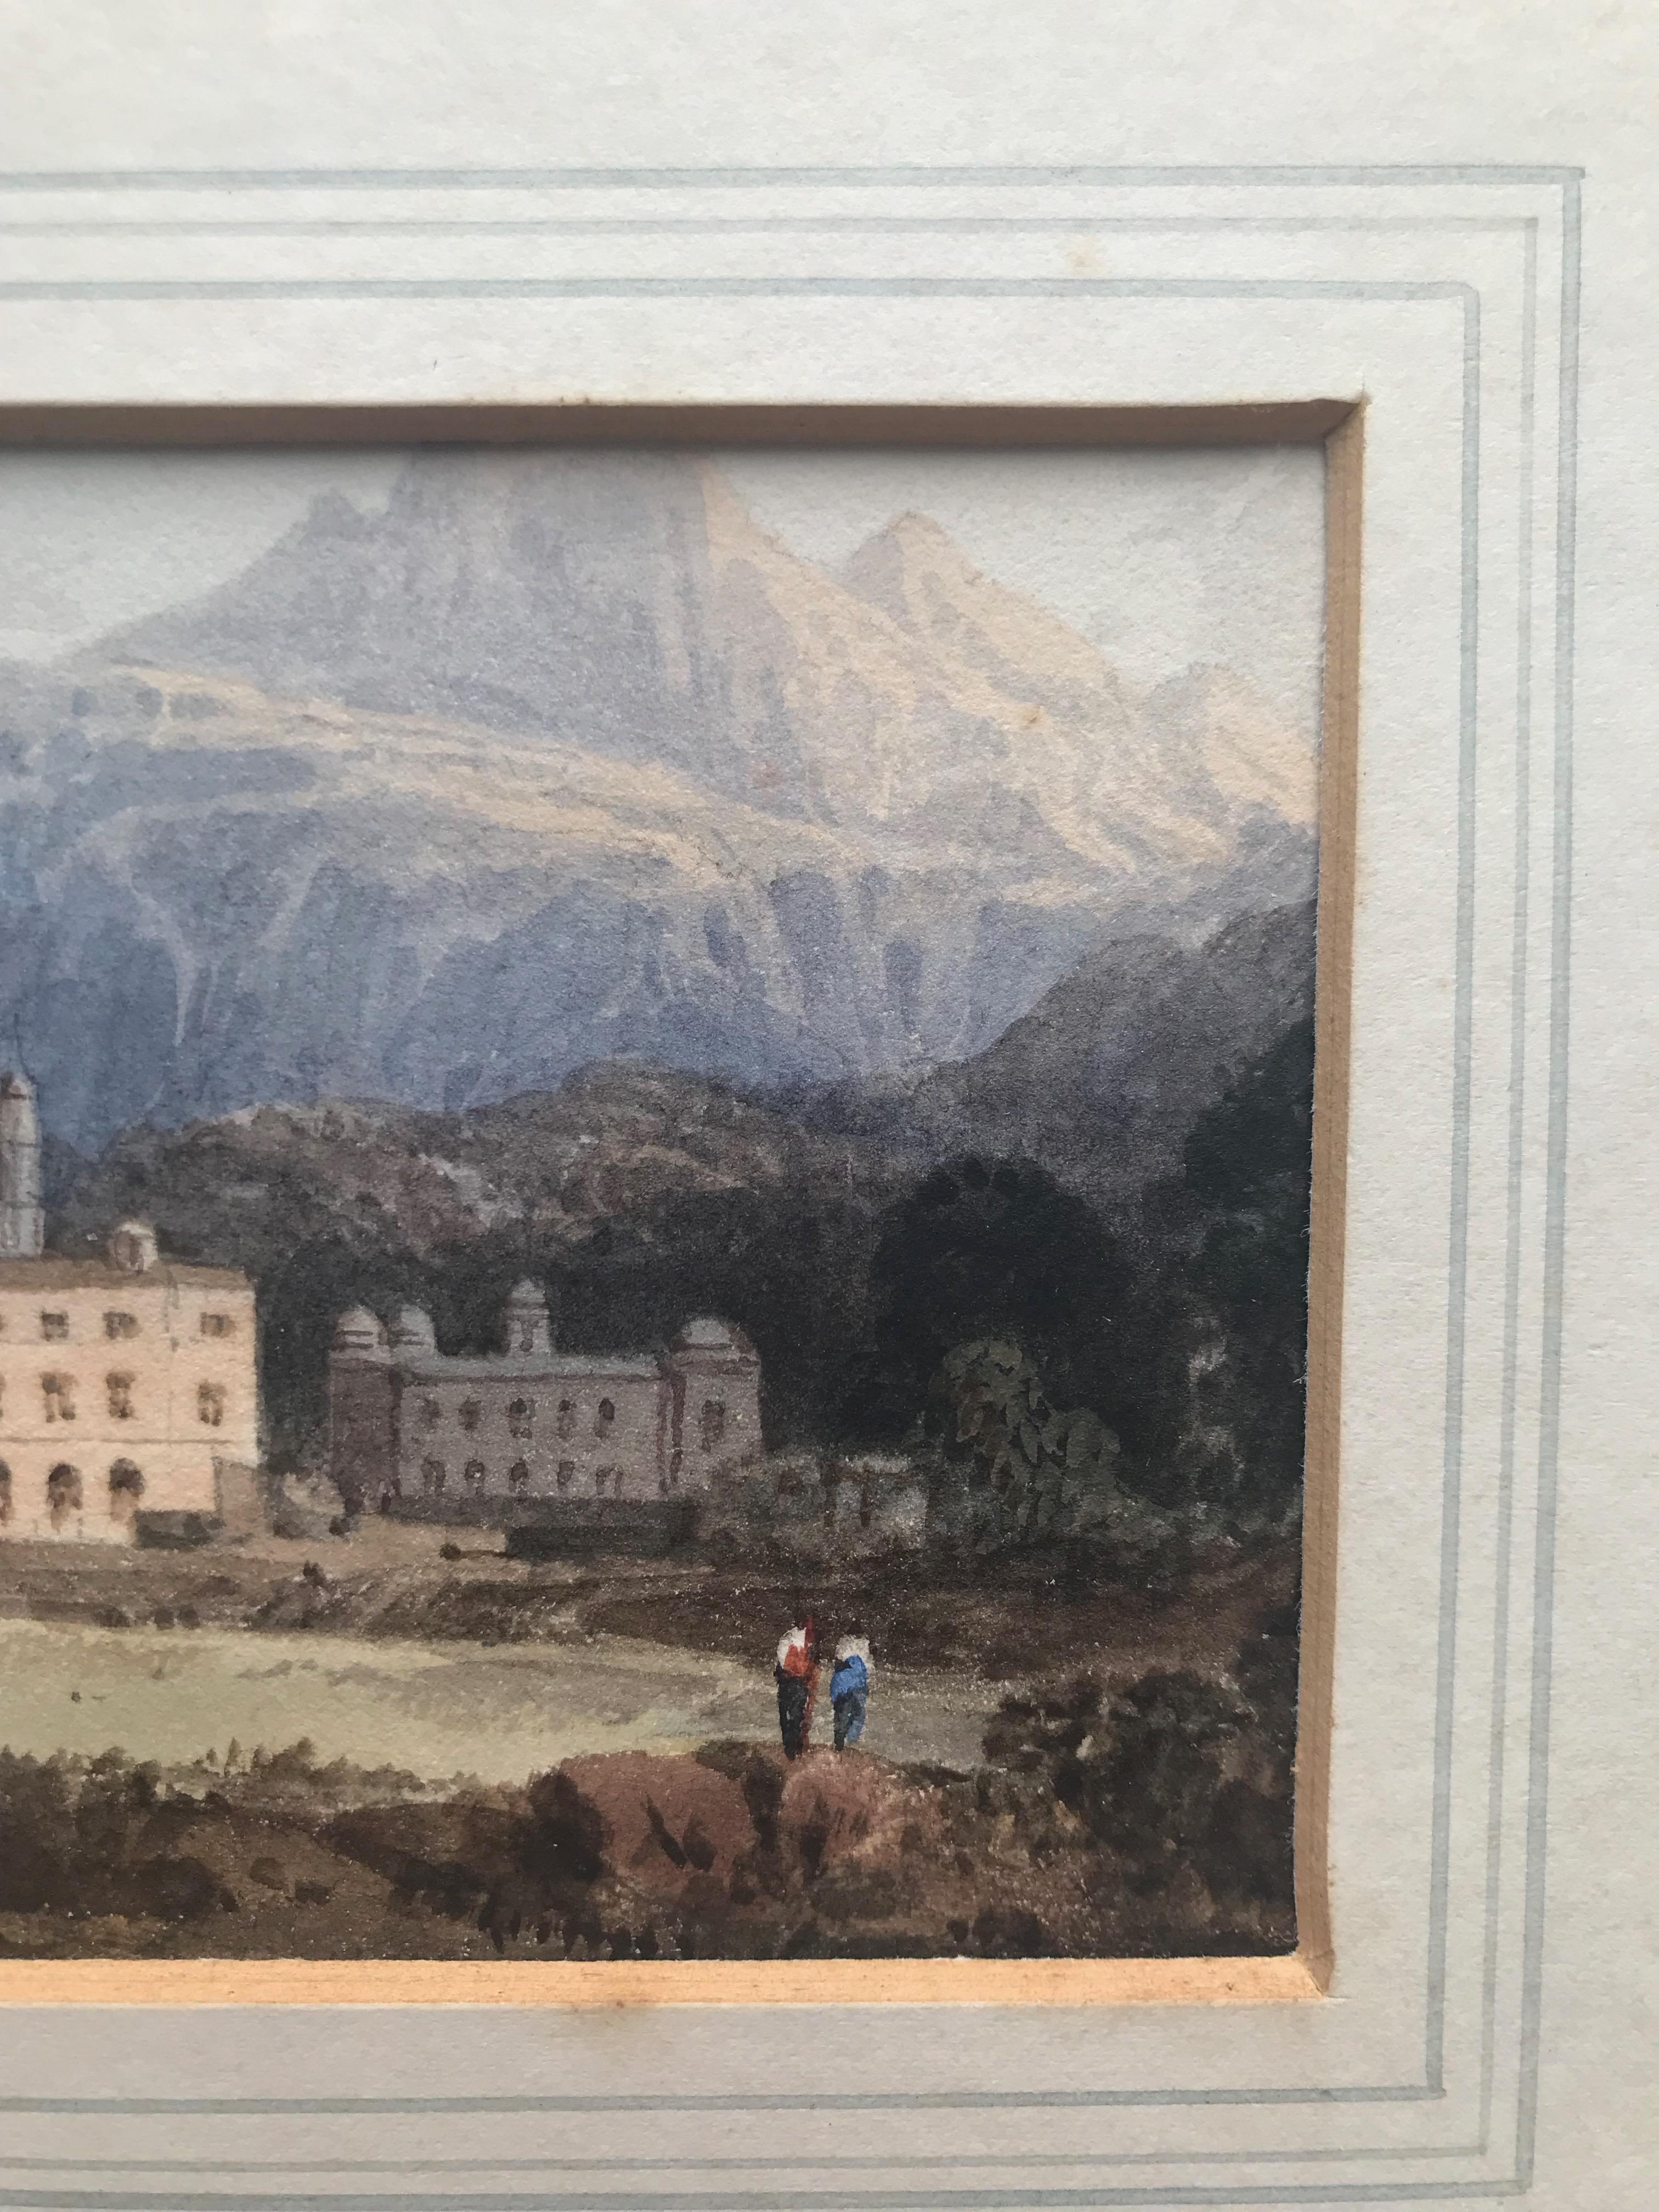 William Crouch (active 1817-1850)
A view of a country estate in the mountains
Watercolour 
3 x 4½
8¼ x 9¼ inches with frame

William Crouch was a prolific artist working in the early to mid 19th century. His pleasing compositions are quite often